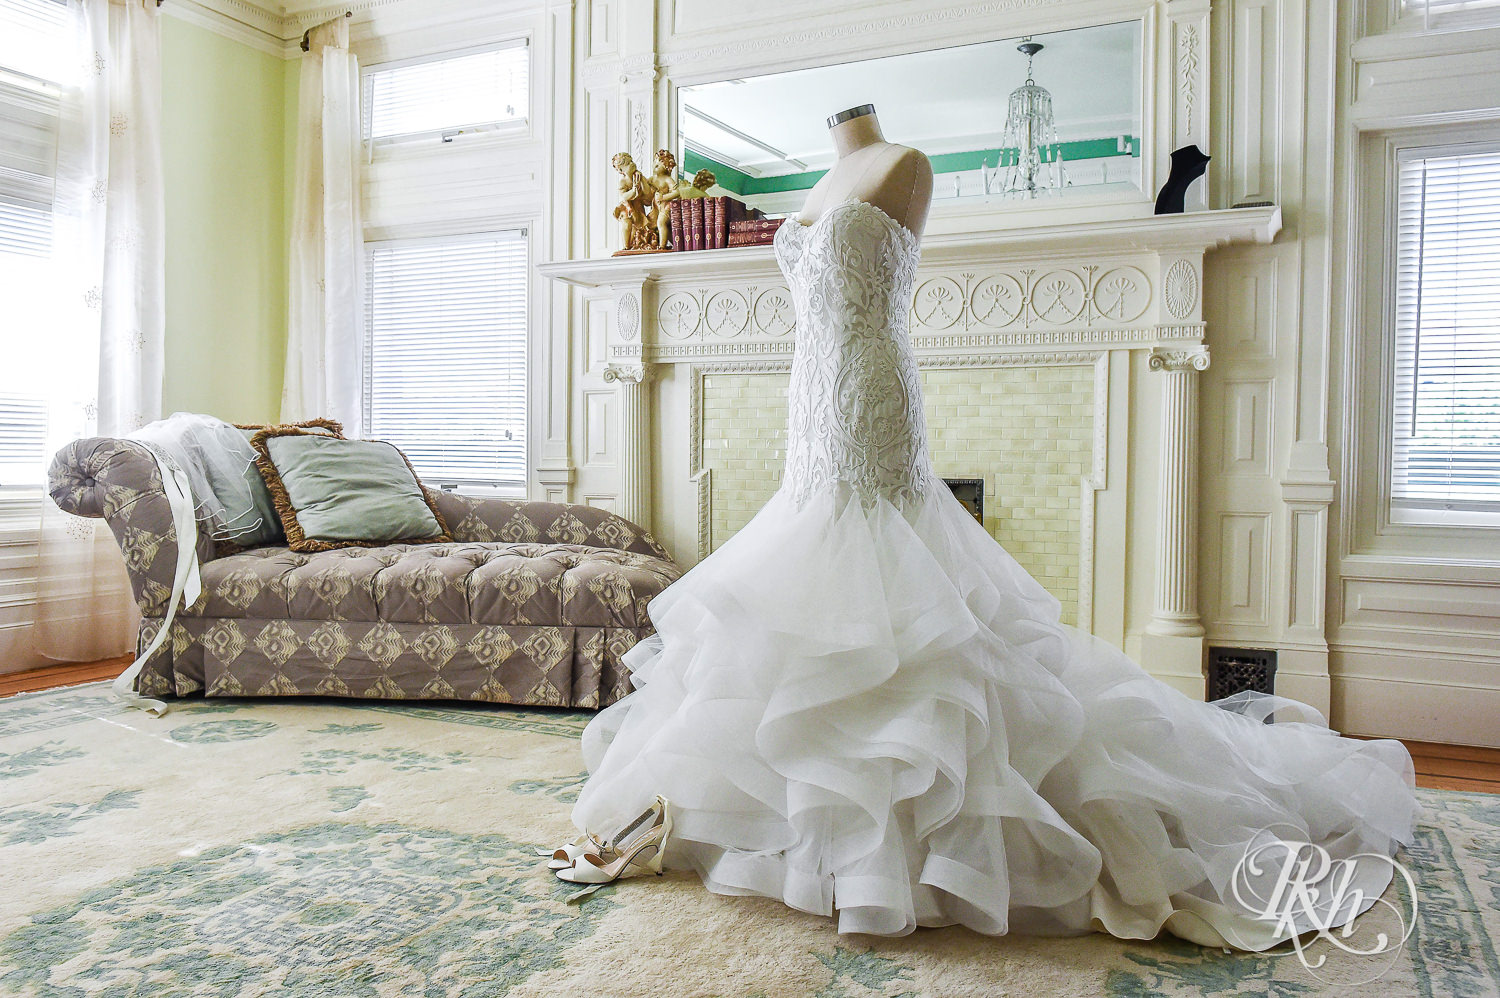 Wedding dress and shoes at the Van Dusen Mansion in Minneapolis, Minnesota.